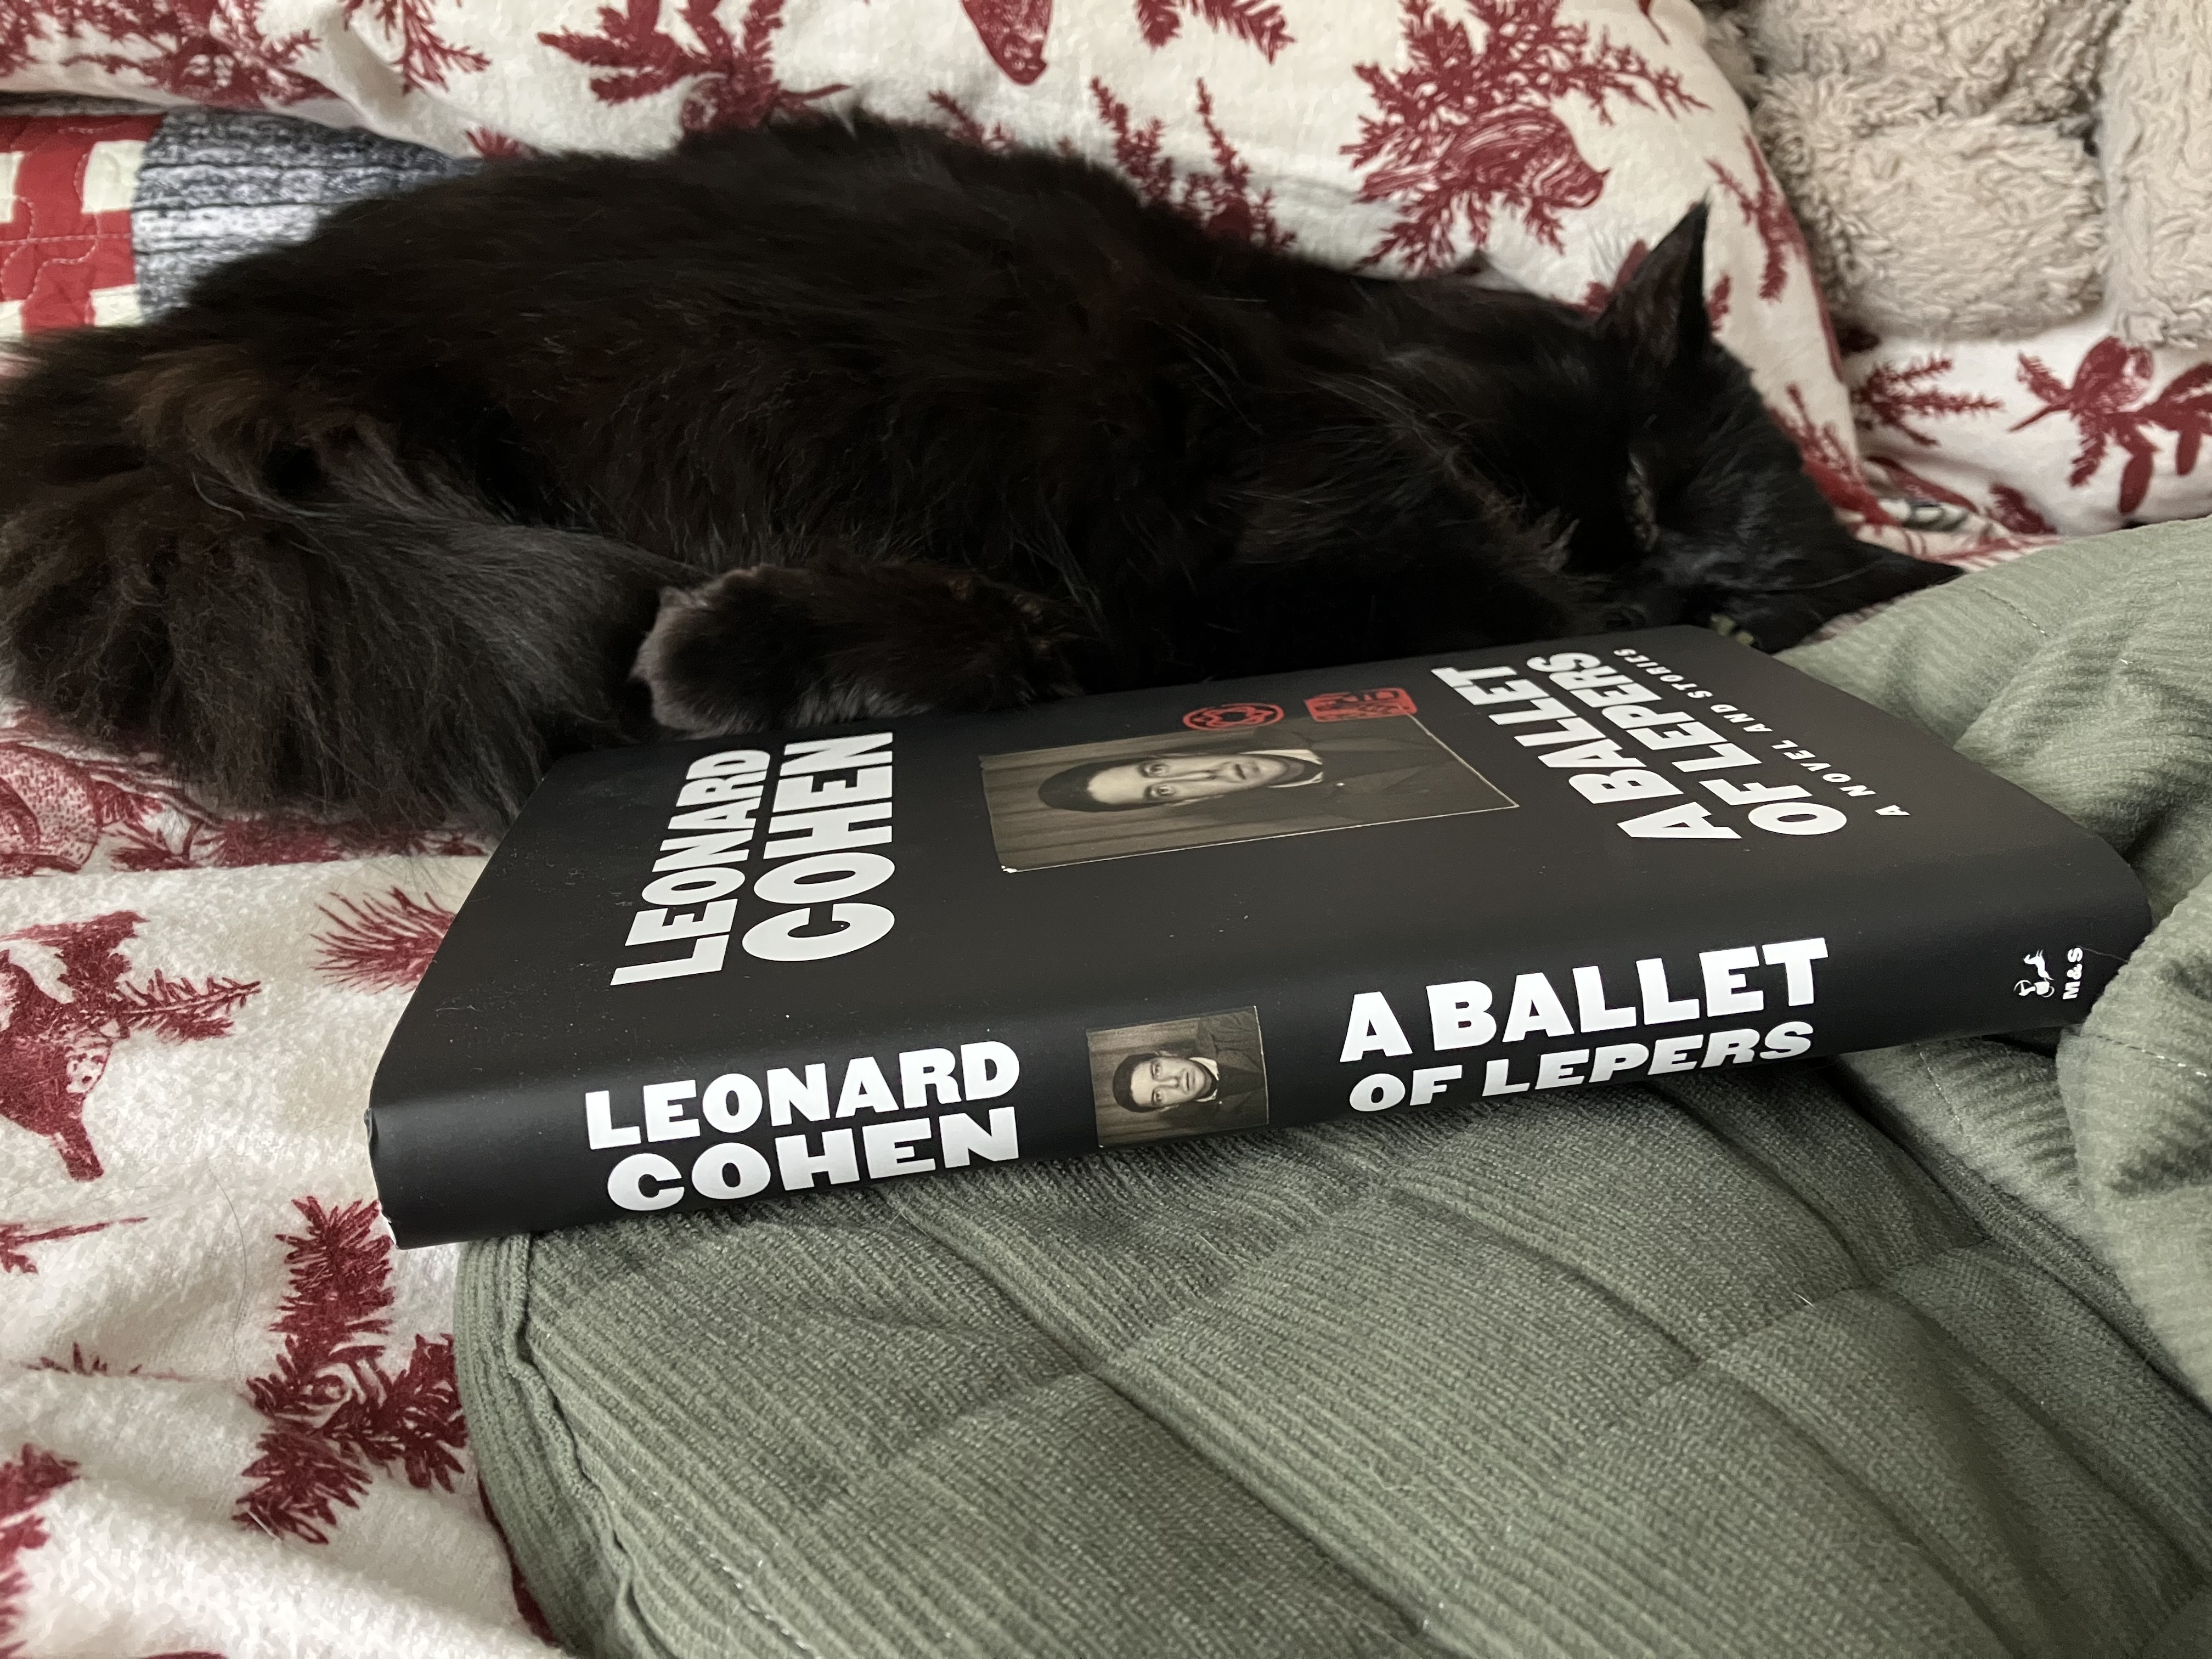 A black cat sleeps behind Leonard Cohen's A Ballet of Lepers. The book is black with white block font and a passport photo of Cohen on the cover.